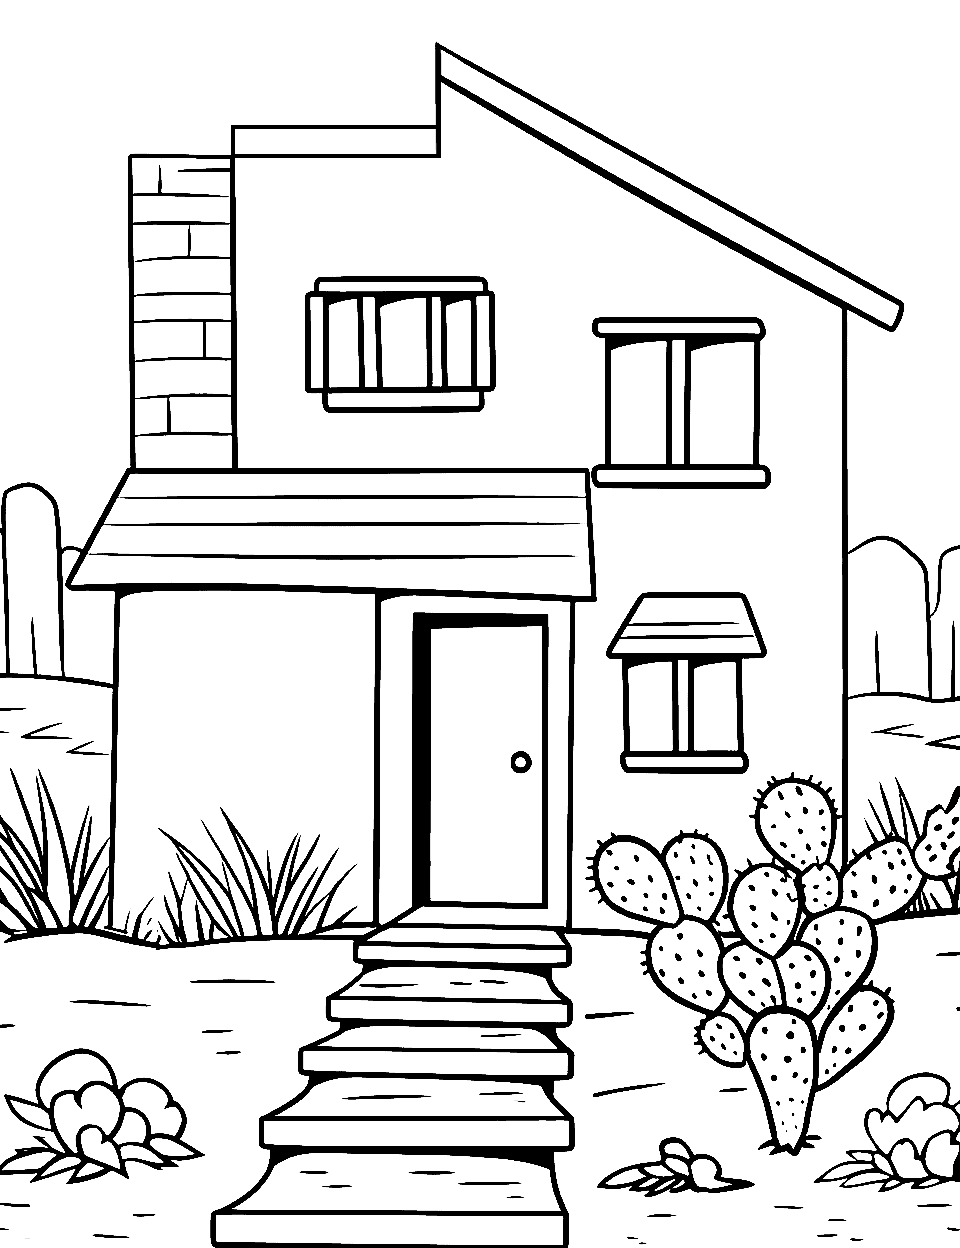 Desert Adobe Dwelling Coloring Page - An adobe house in the desert.